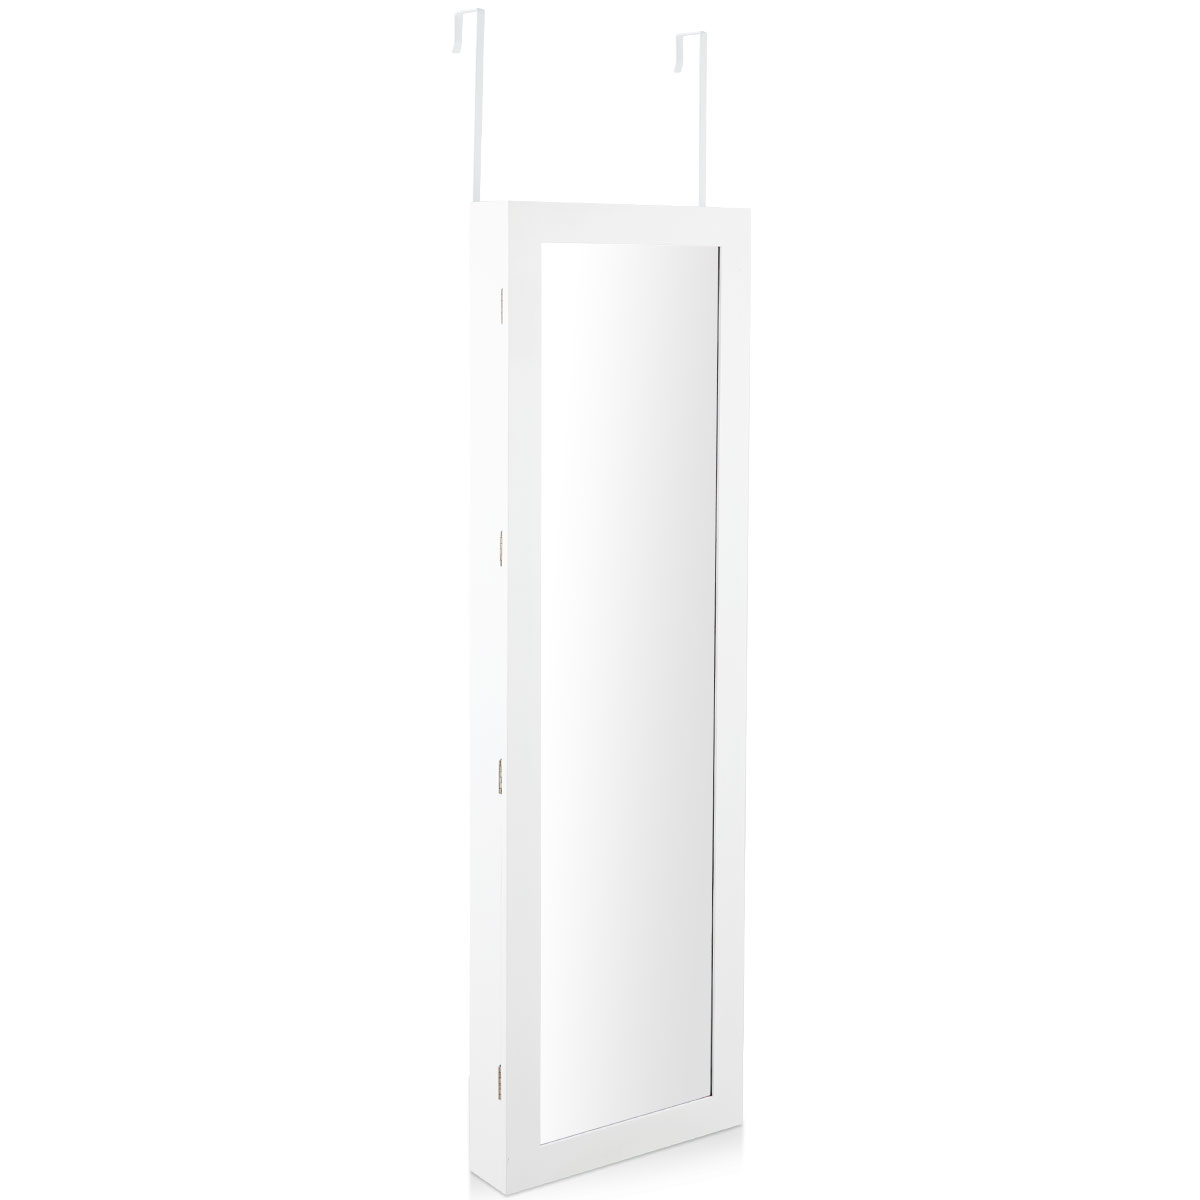 Topbuy Lockable Wall Mounted Mirrored Jewelry Organizer White Armoire Cabinet w/ LED Lights